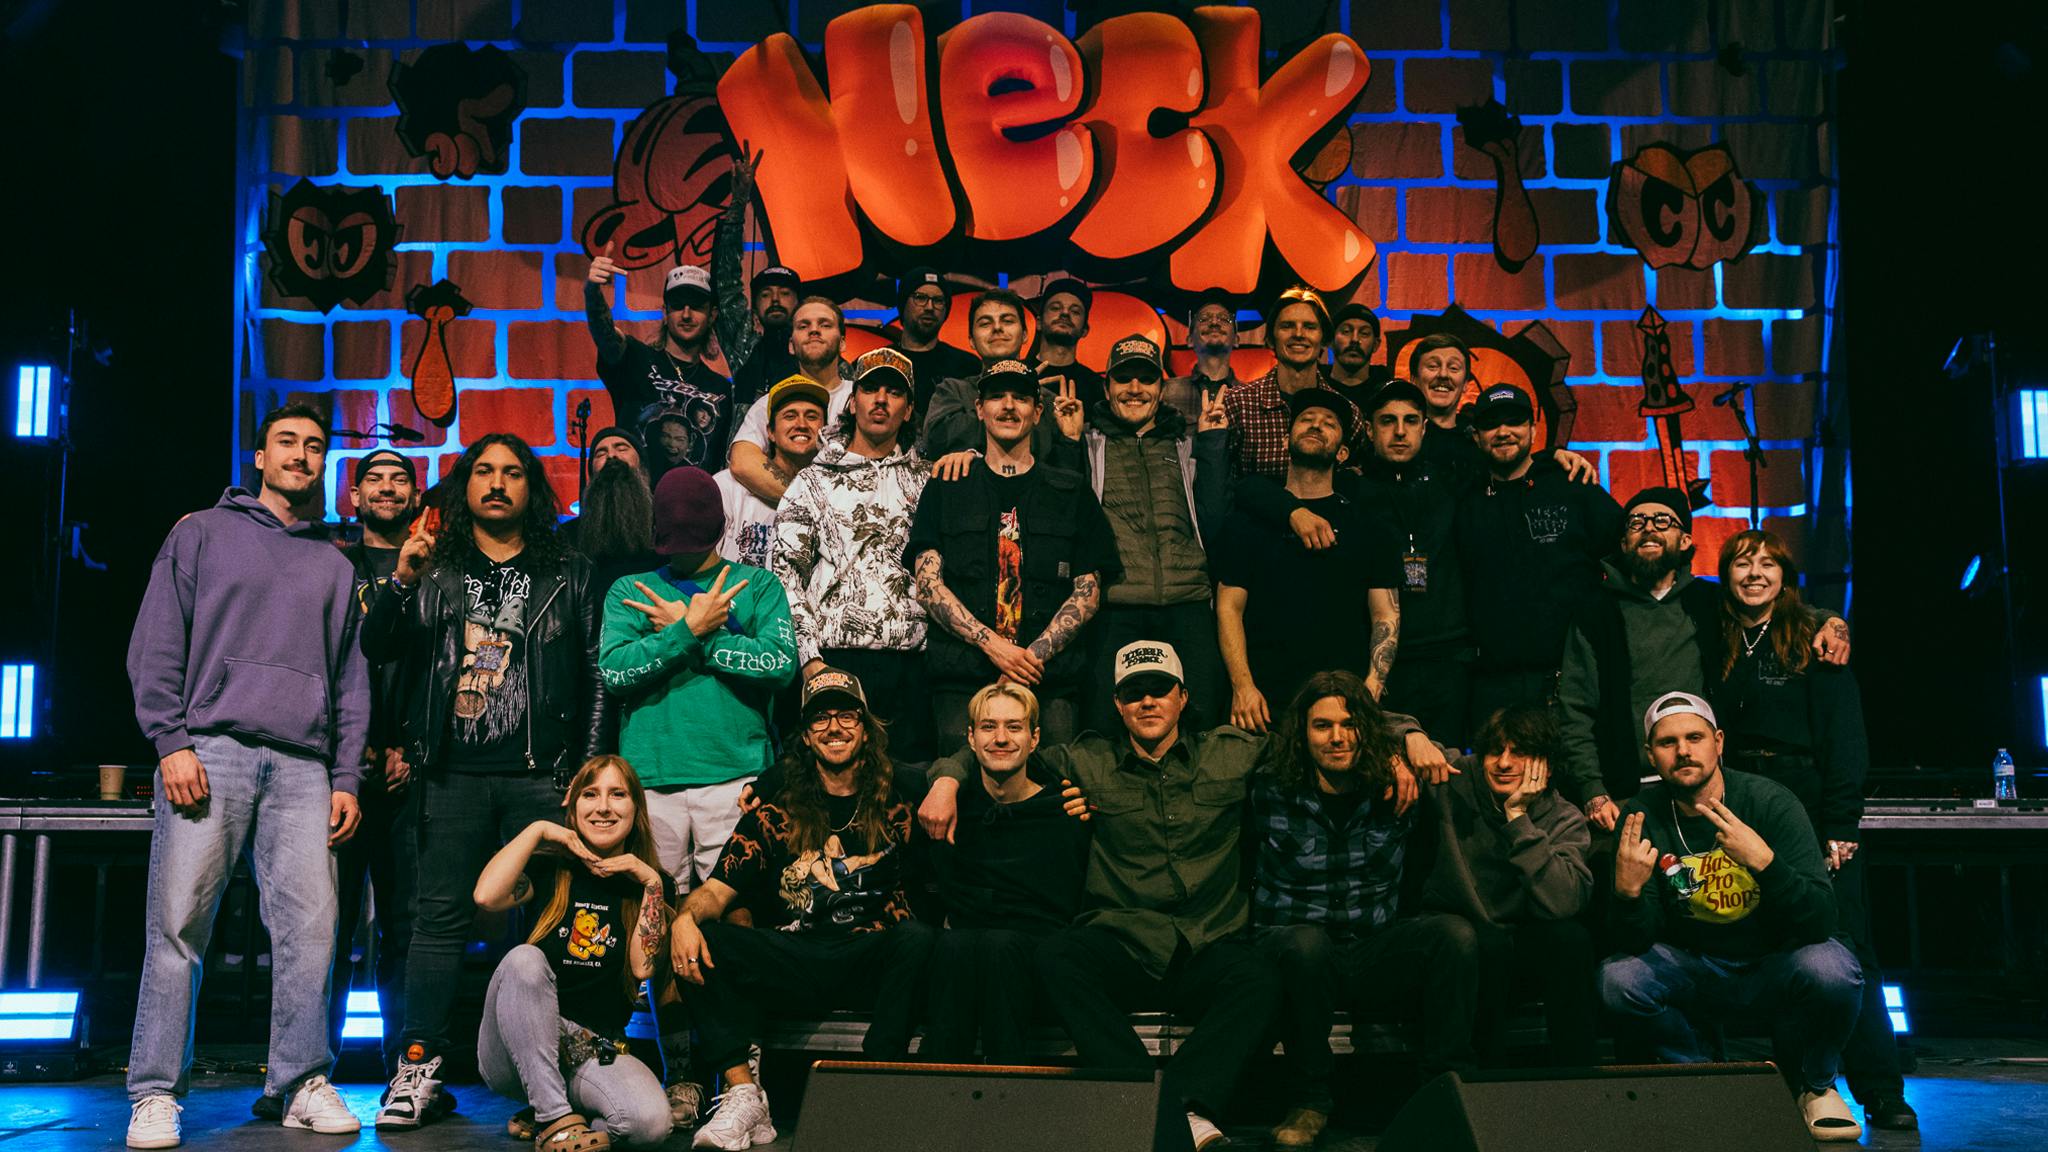 “Every venue should have its own dog”: Neck Deep’s U.S. tour, in pictures